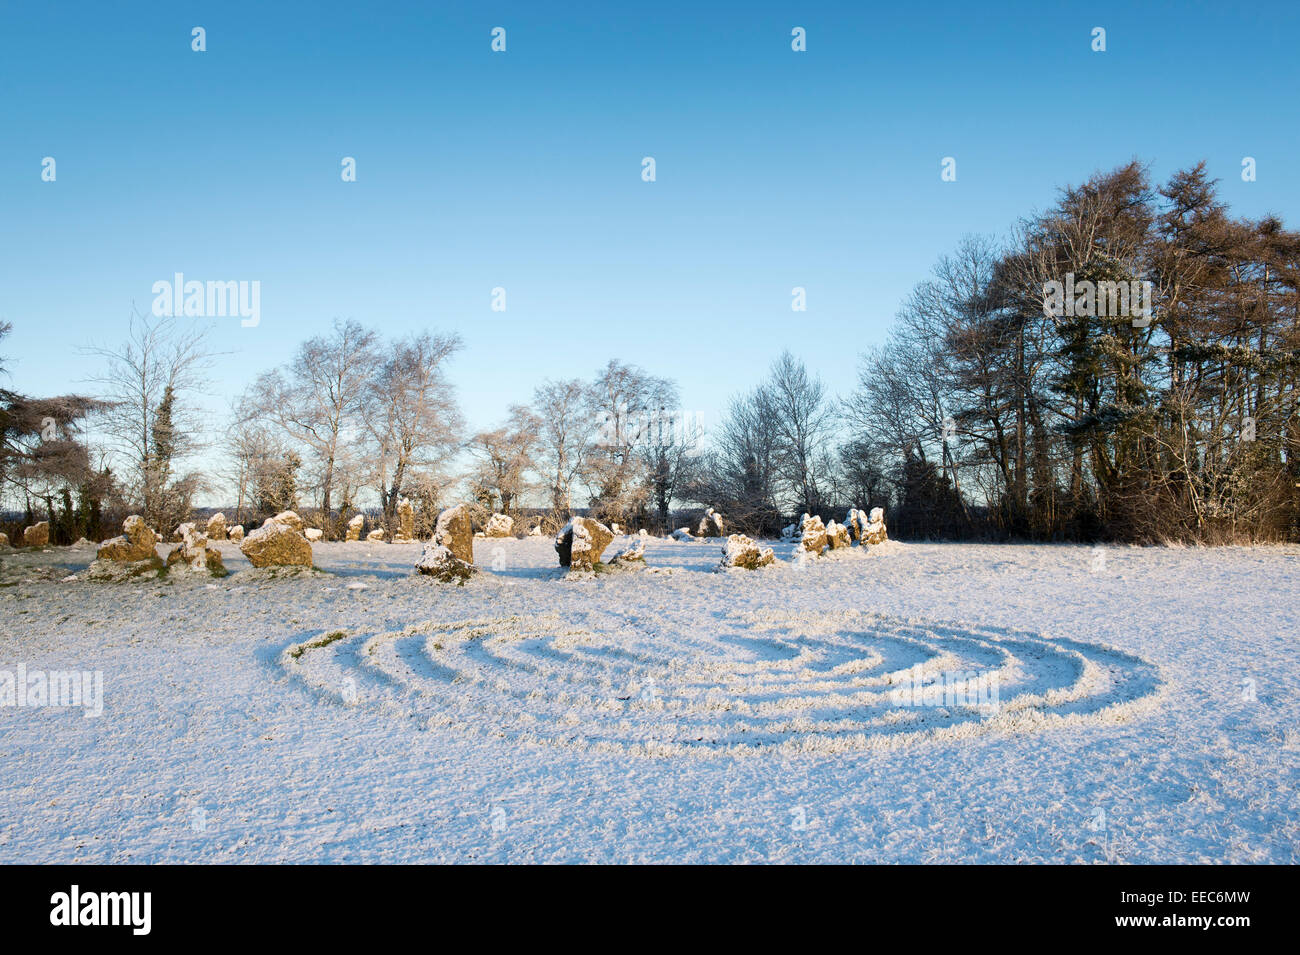 Labyrinth symbol at the Rollright stones covered in snow in winter. Oxfordshire, England. Stock Photo